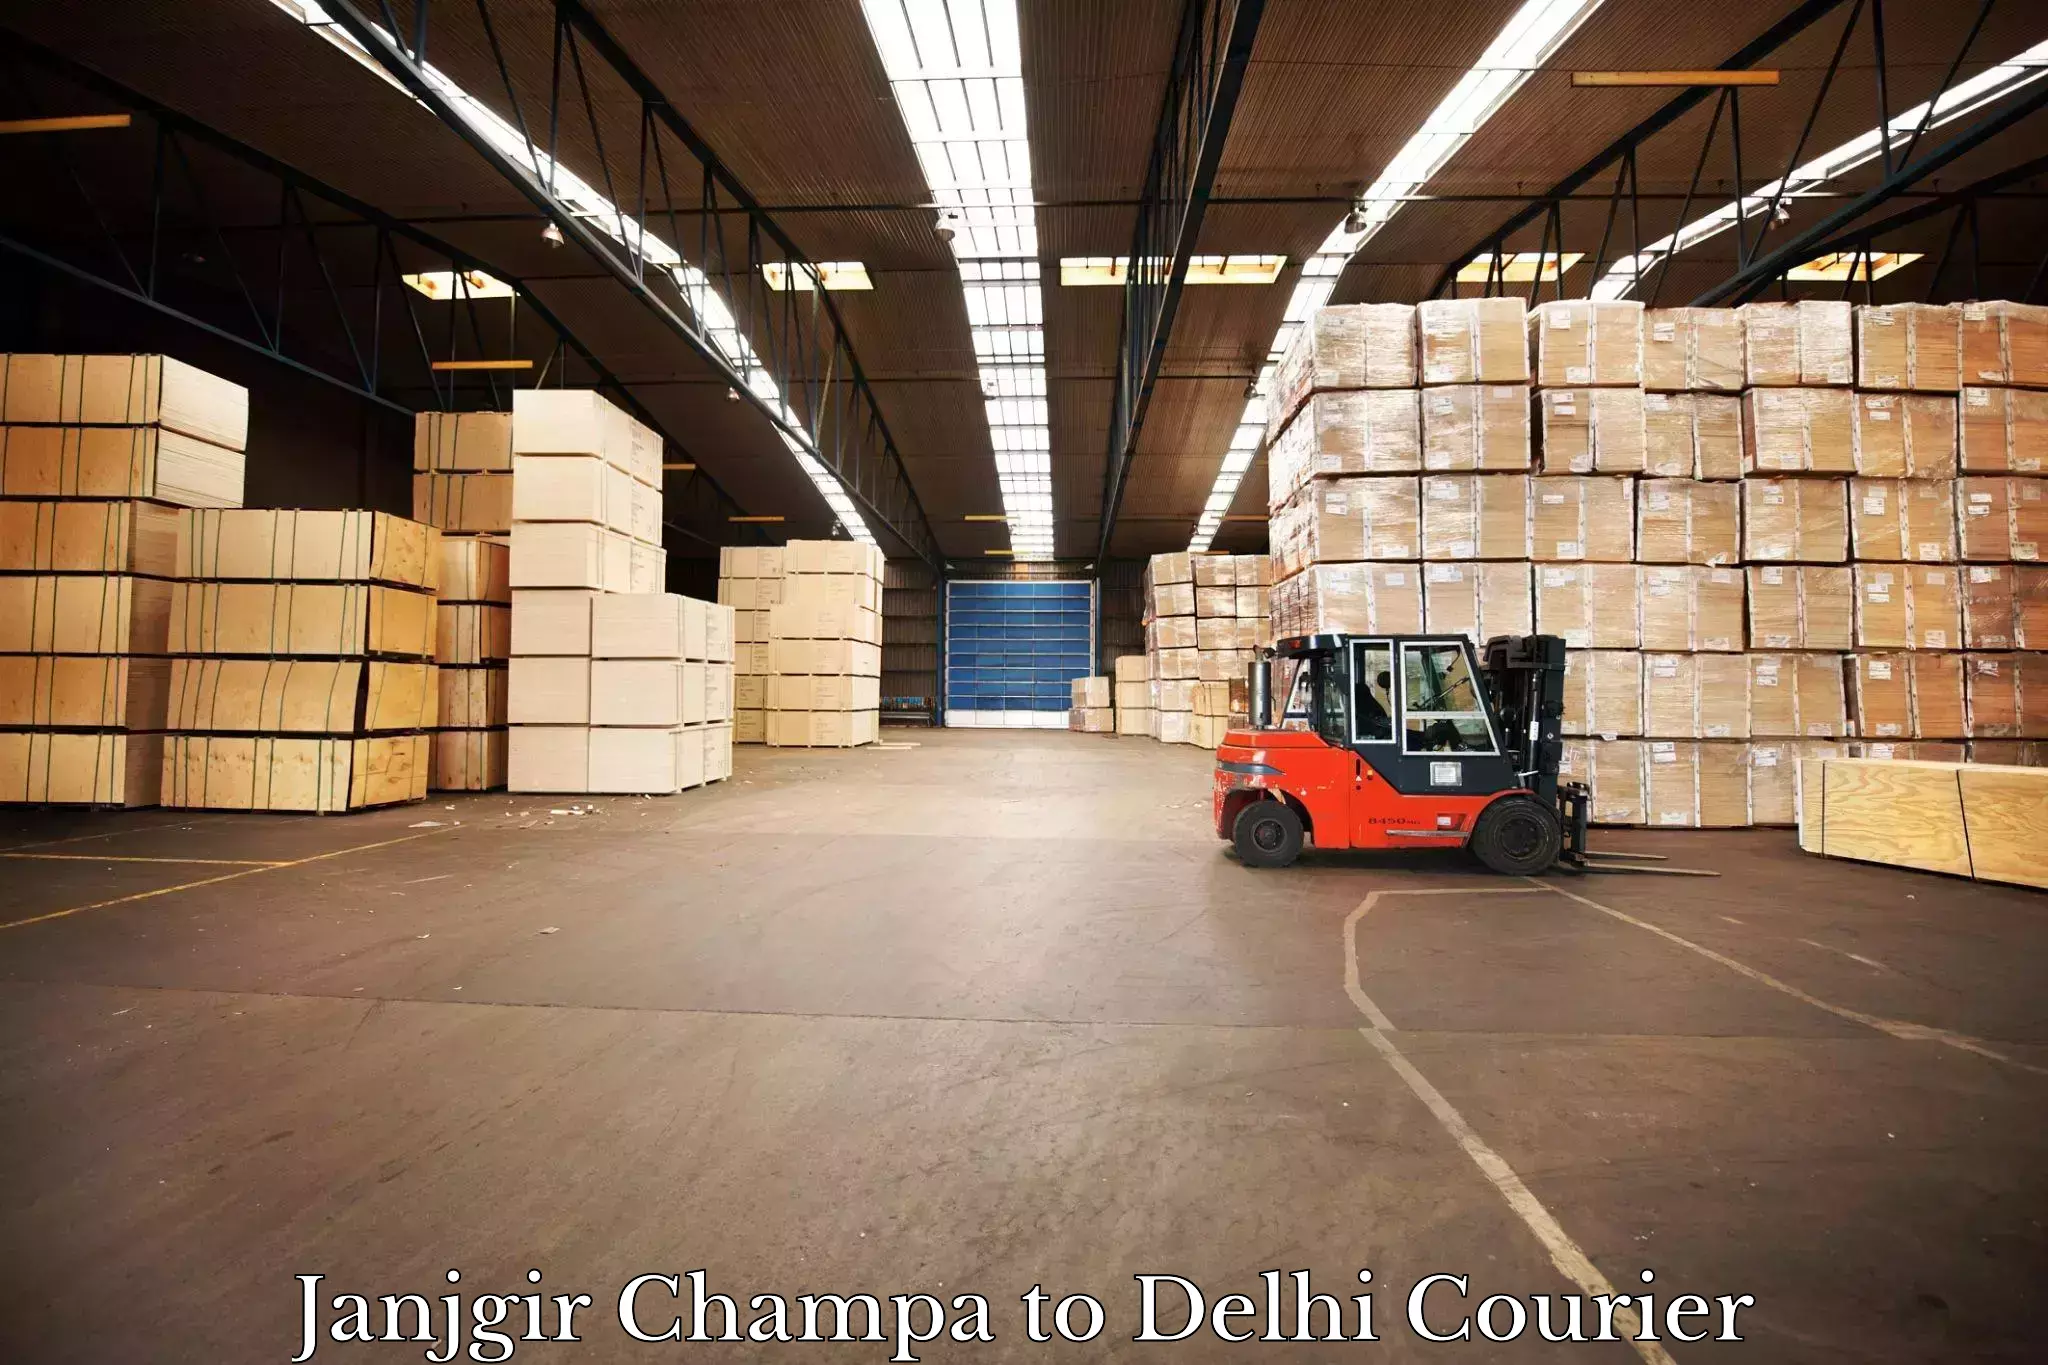 Reliable delivery network Janjgir Champa to University of Delhi